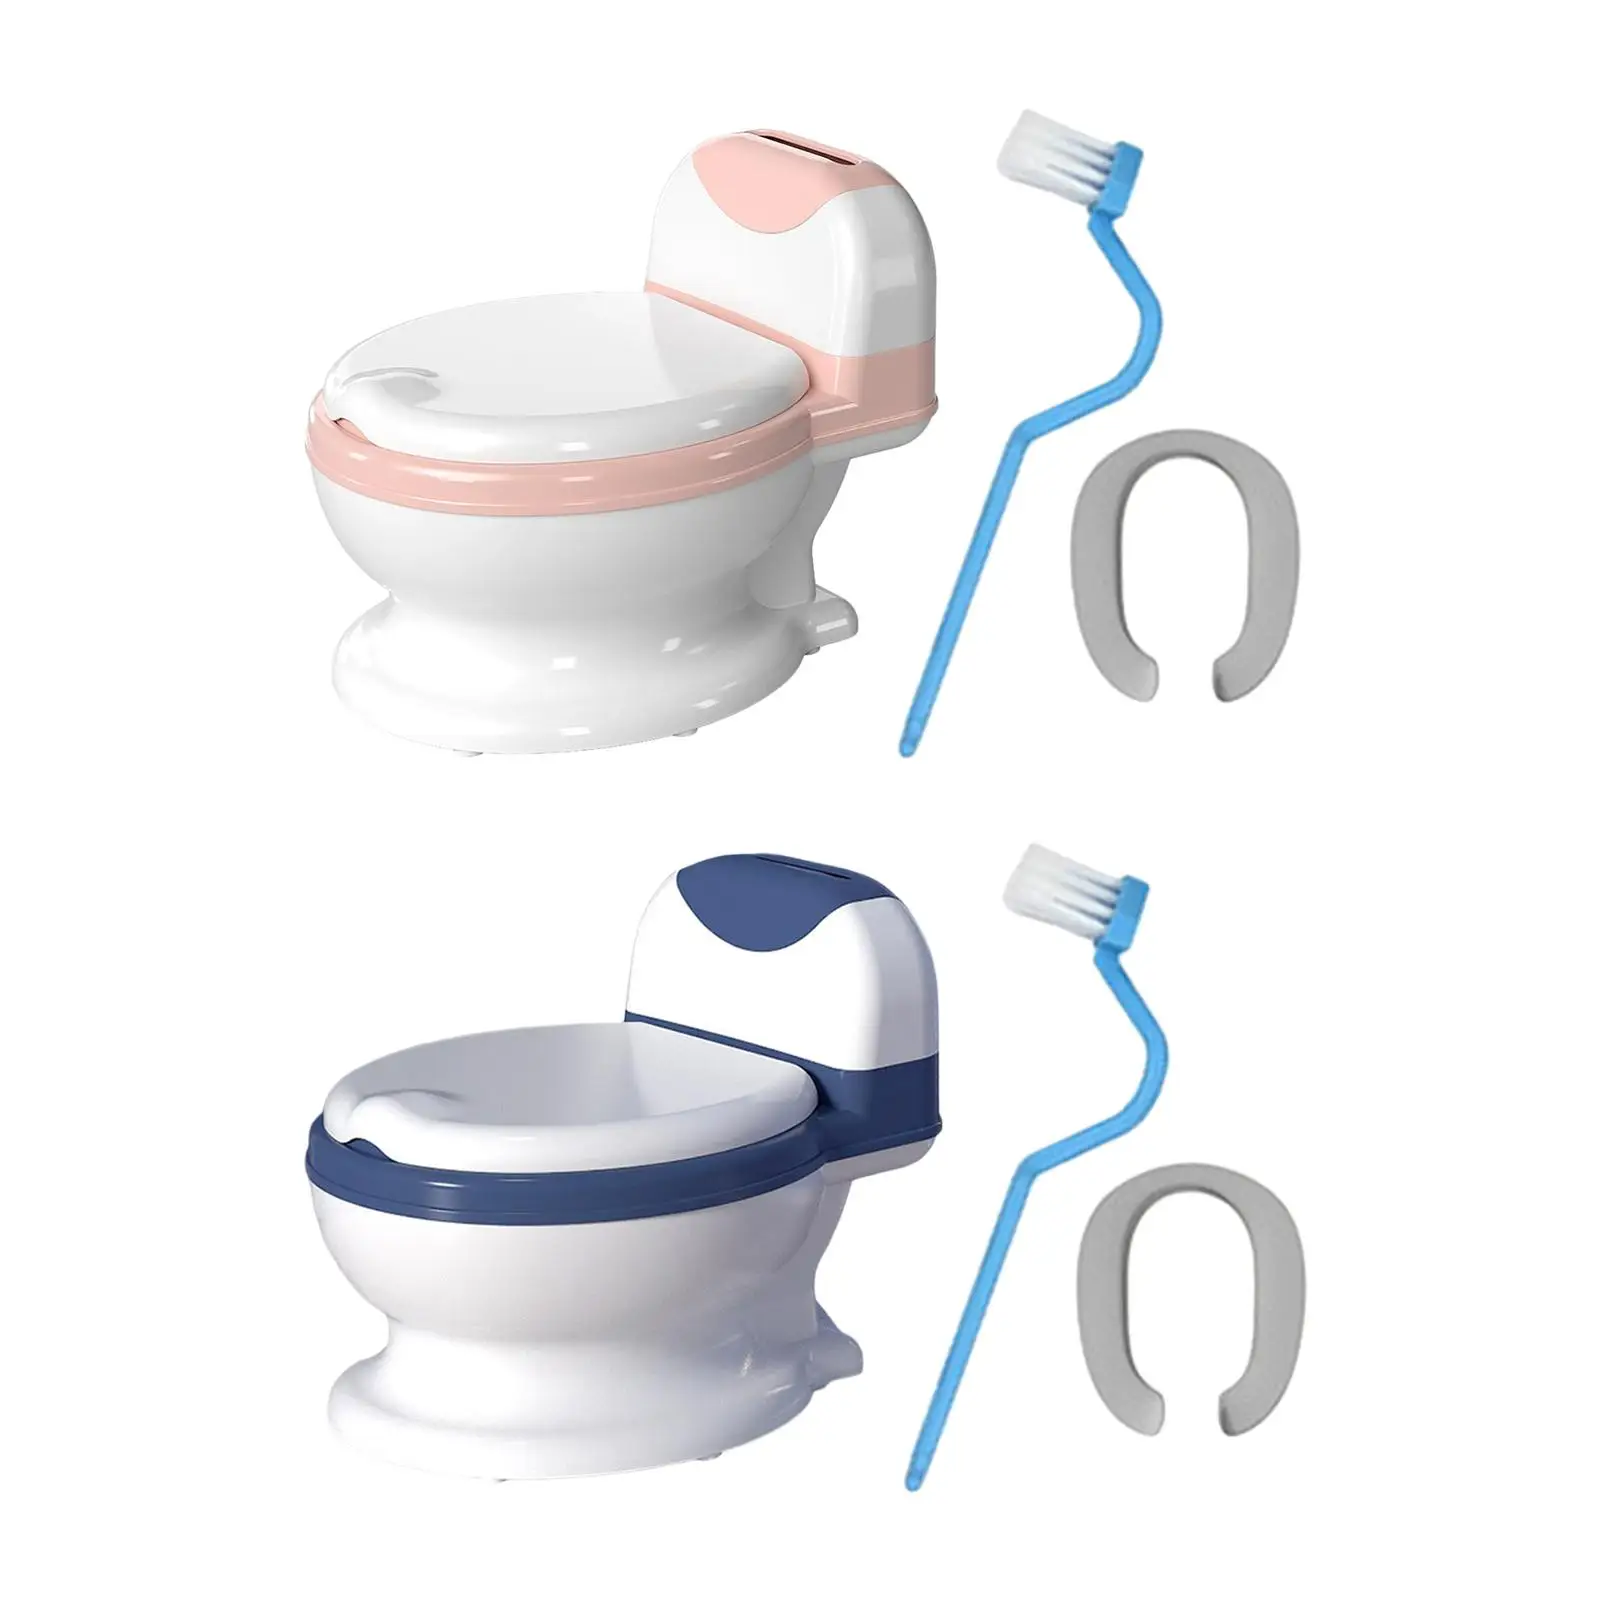 Potty Train Toilet Portable Real Feel Potty for Hotel Outdoor Indoor